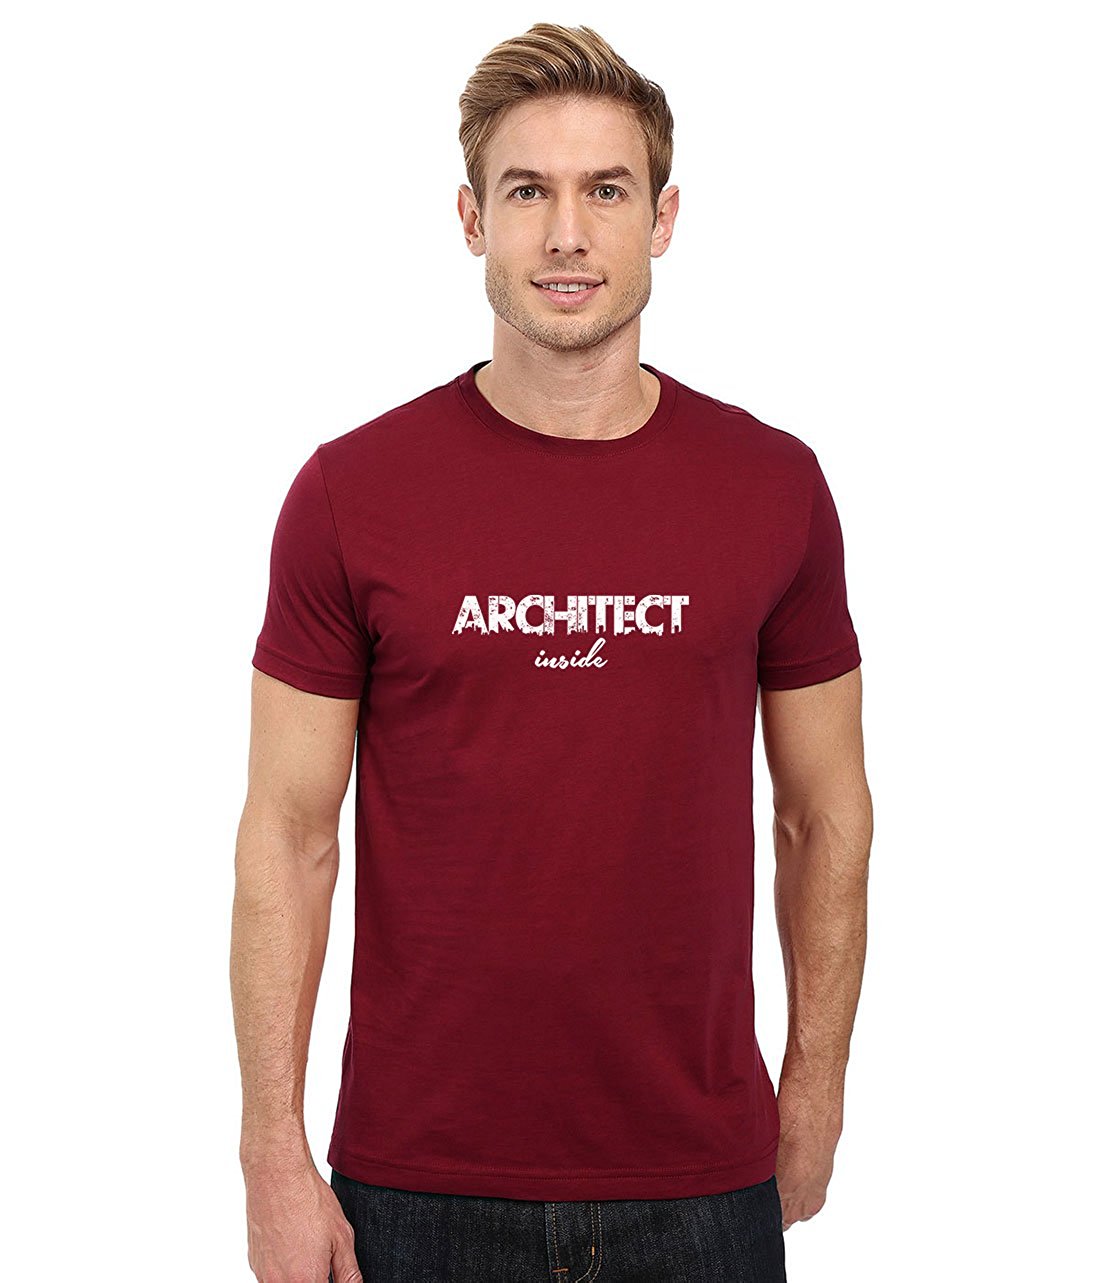 DOUBLE F ROUND NECK HALF SLEEVE ARCHITECT INSIDE WITH 08 COLORS PRINTED T-SHIRT FOR MEN